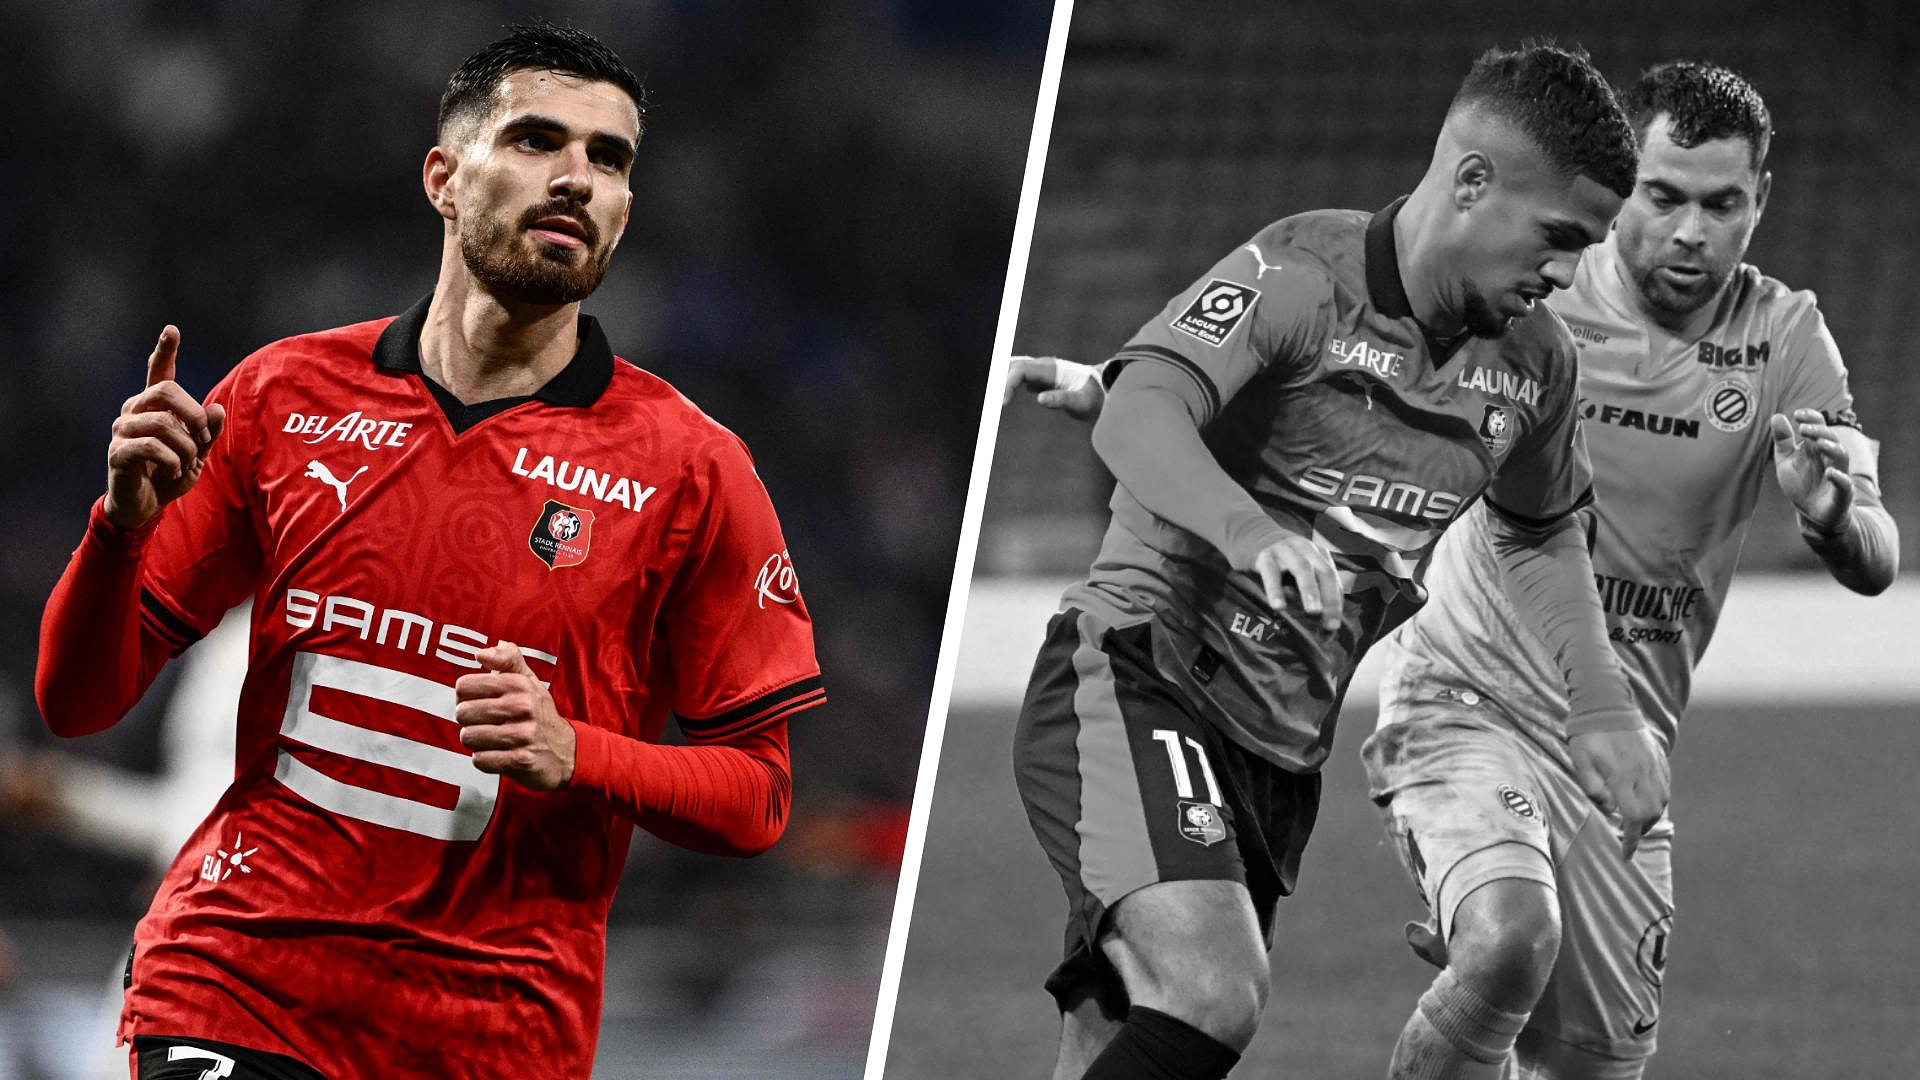 Rennes-Montpellier: Martin Terrier's performance contrasts with that of his replacement Ludovic Blas... Tops and flops